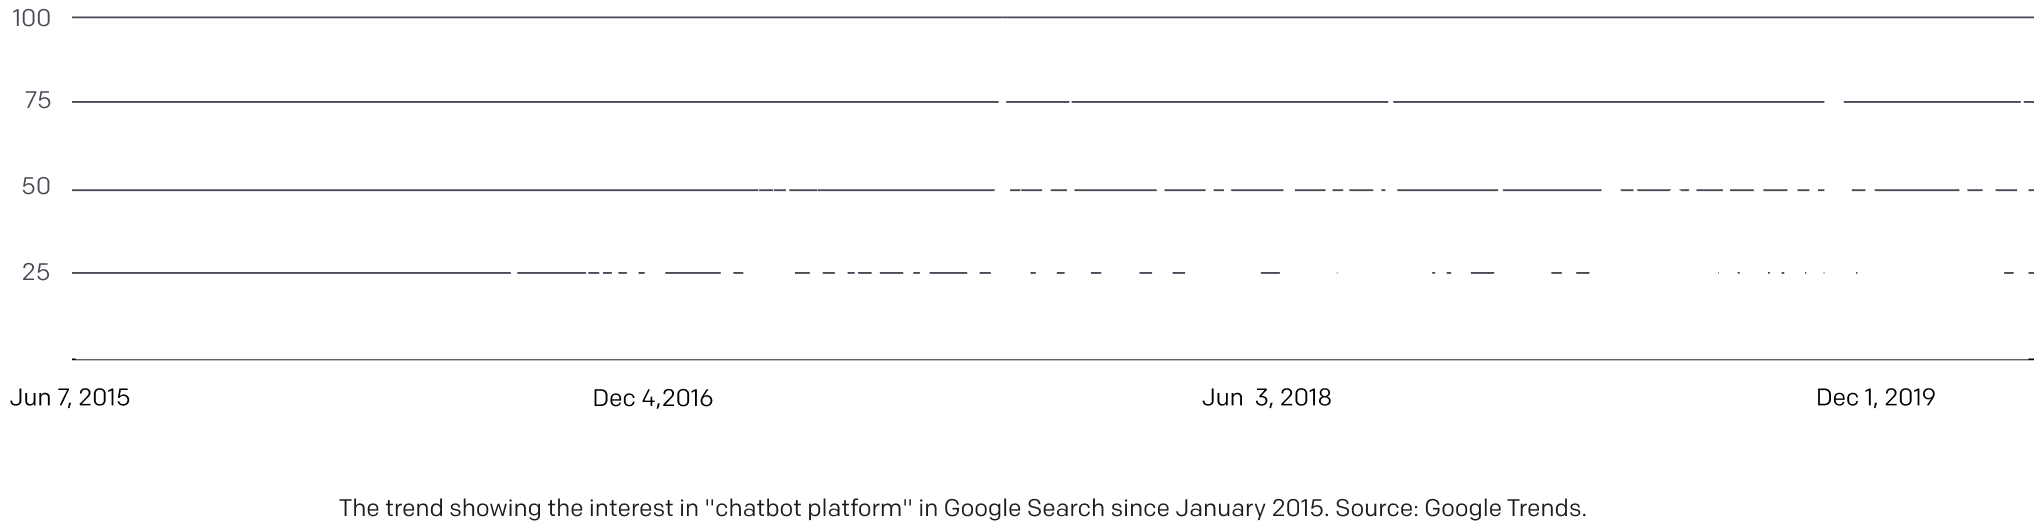 Trend showing the interest in chatbot platform in Google Search